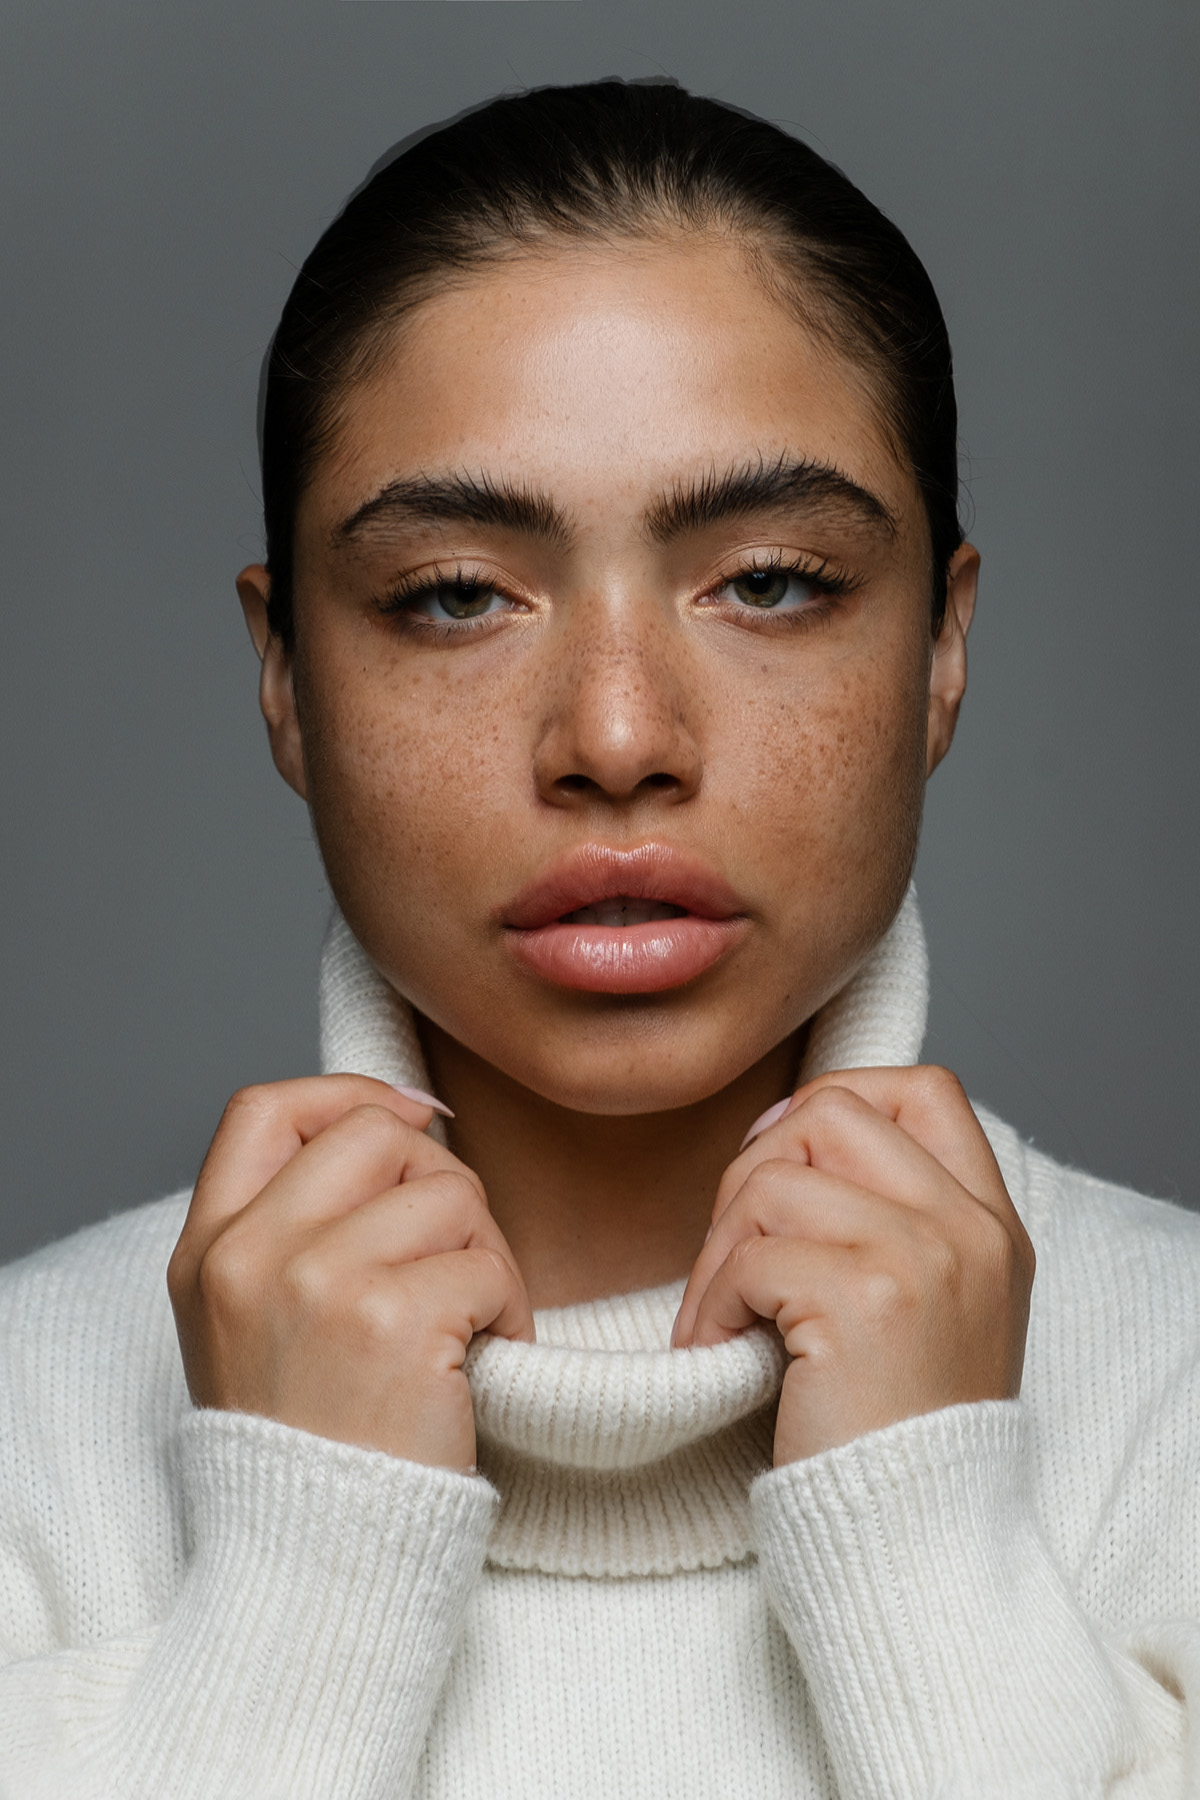 Portrait of a woman with natural makeup, showcasing her freckled complexion, in a cozy white turtleneck sweater, clutching the collar gently, with a neutral background highlighting her serene expression — From a photography studio in Los Angeles